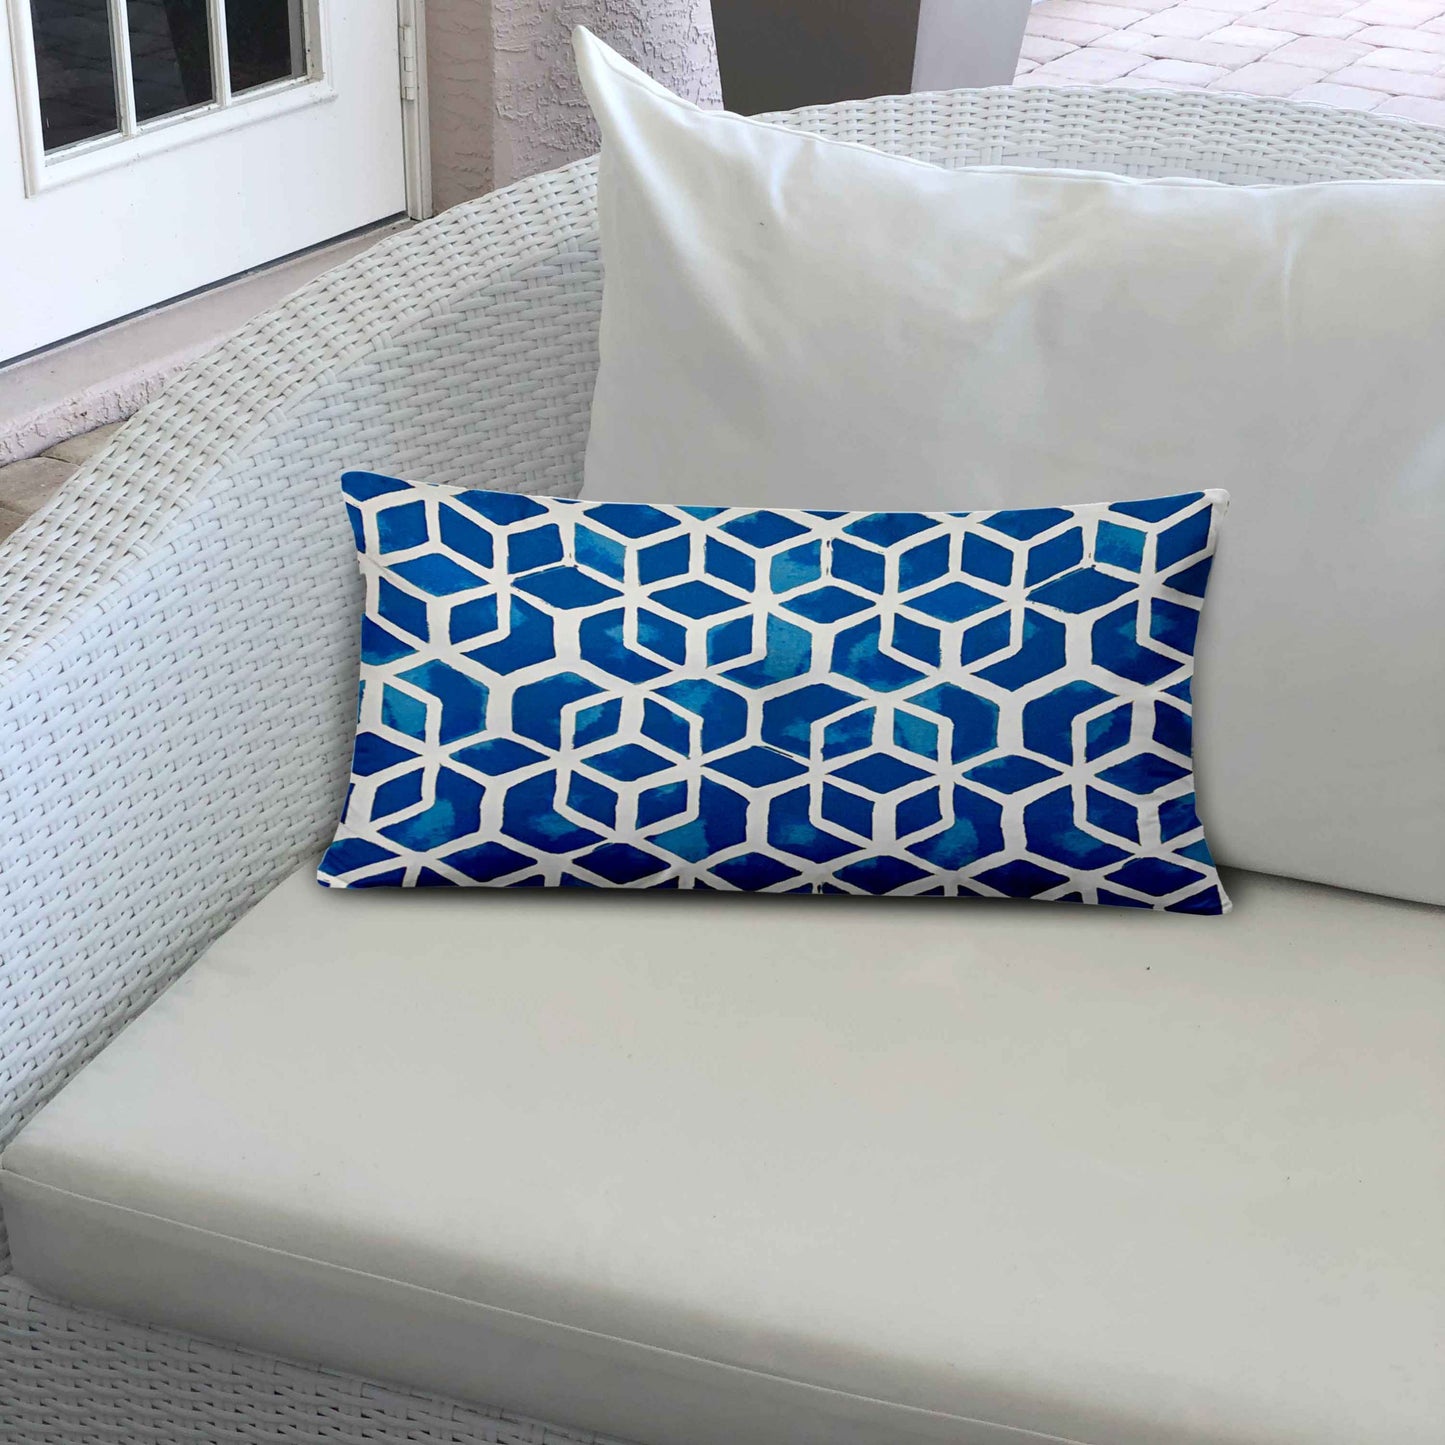 CUBE Indoor/Outdoor Soft Royal Pillow, Zipper Cover Only, 24x36